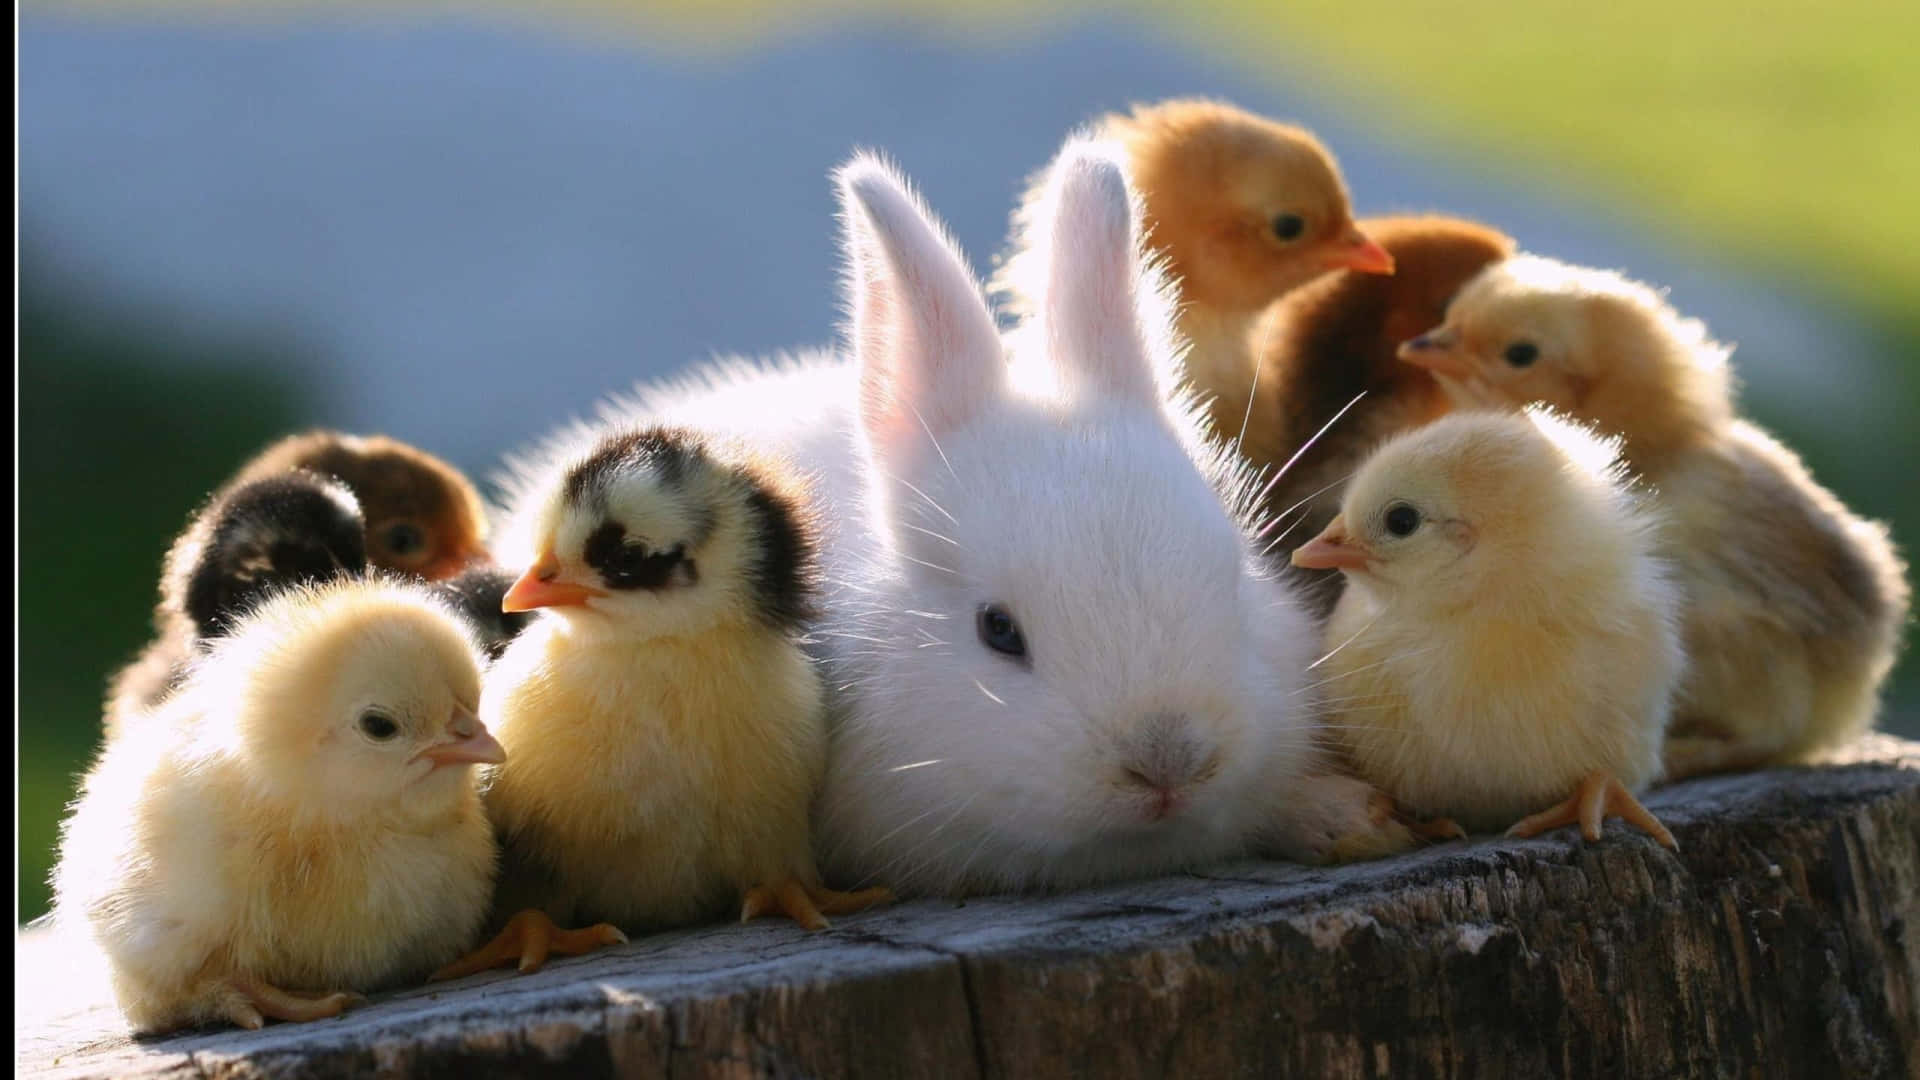 Cute Animal Rabbit And Ducklings Picture